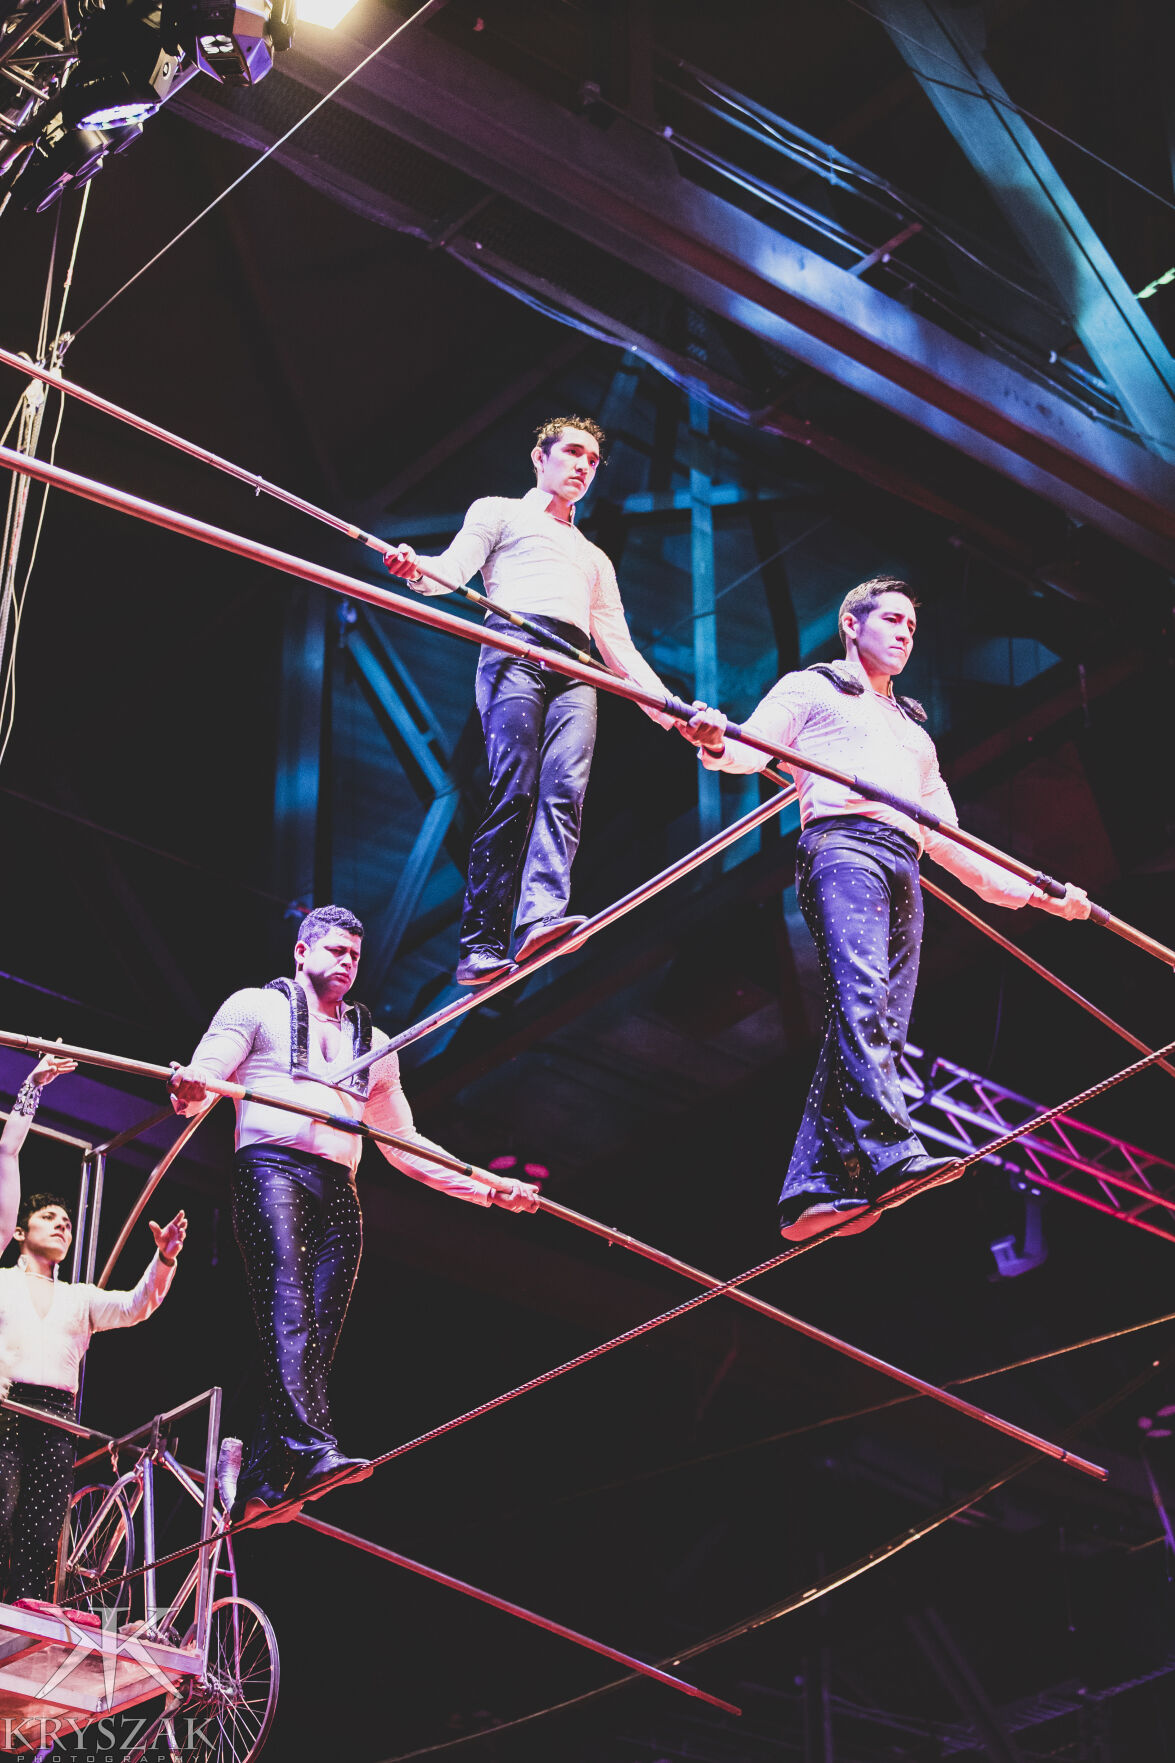 Circus finds haven in Texas, brings tour to Waco Access Waco